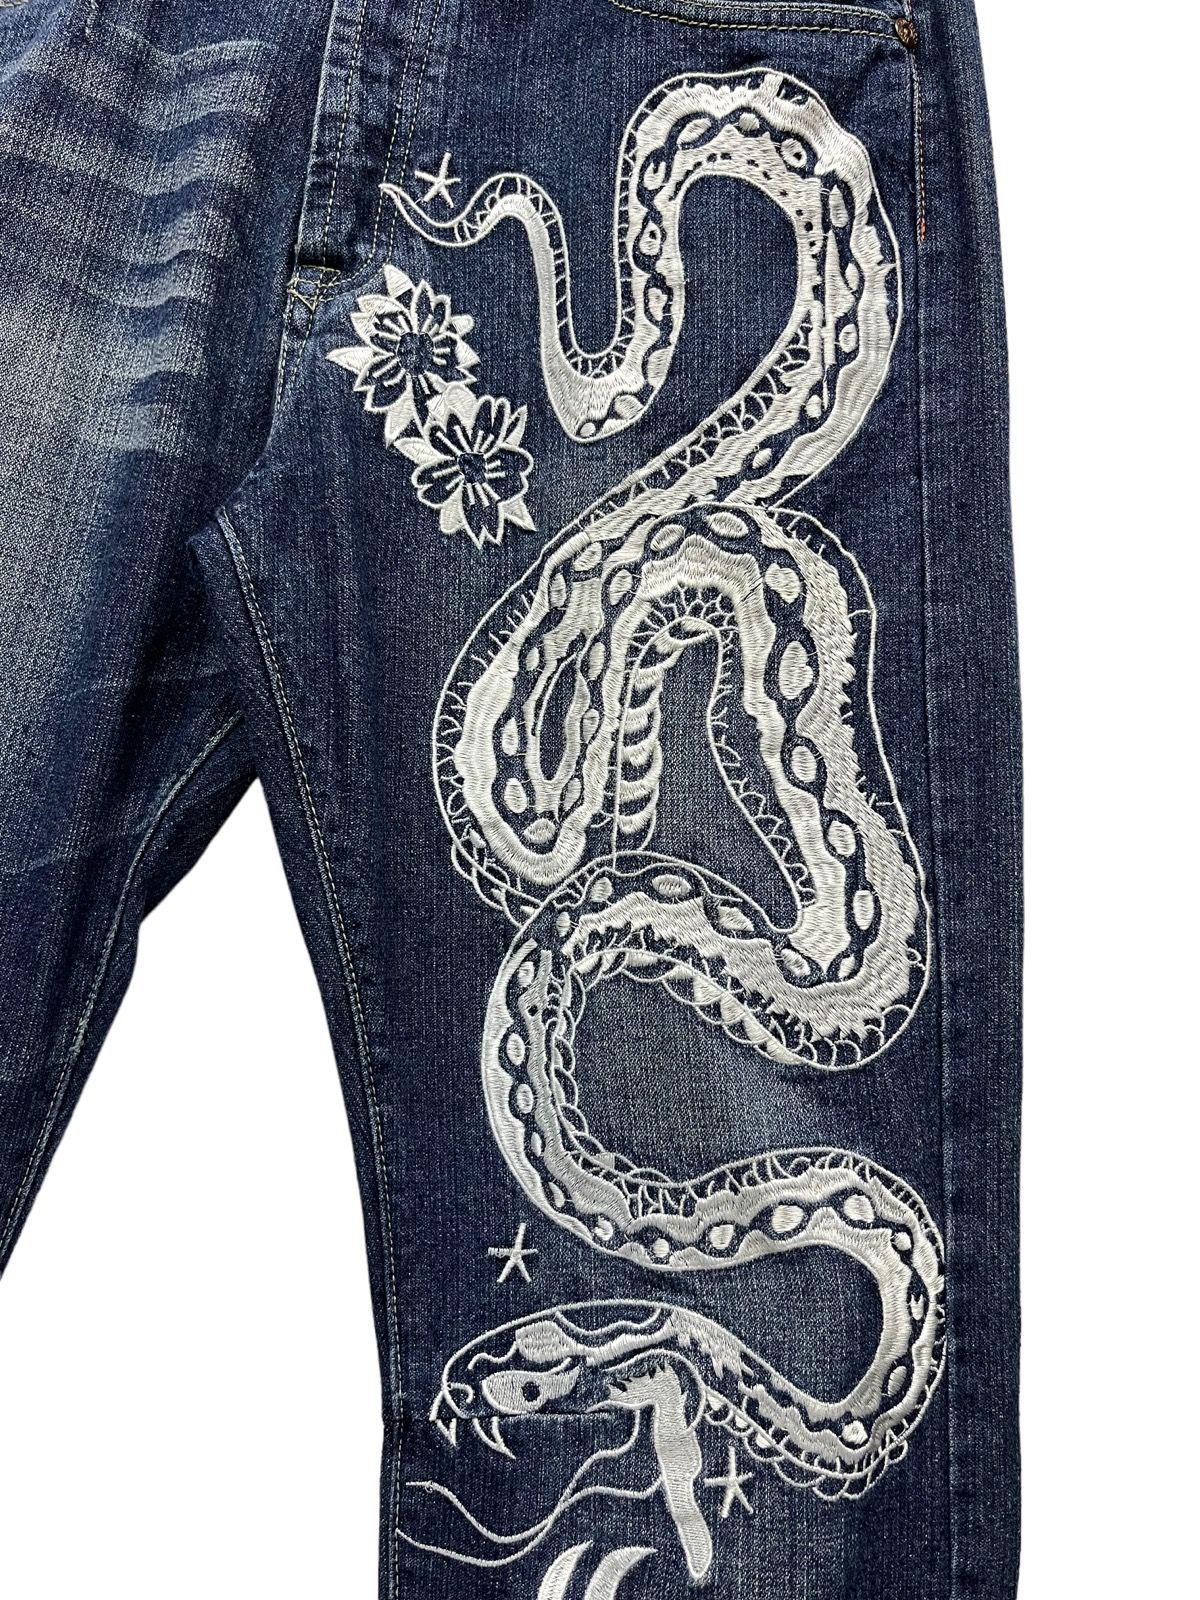 Ed Hardy BINDING NOW🔥ED HARDY Snake & Dragon Embroidered Tattoo Wear Size US 33 - 3 Thumbnail